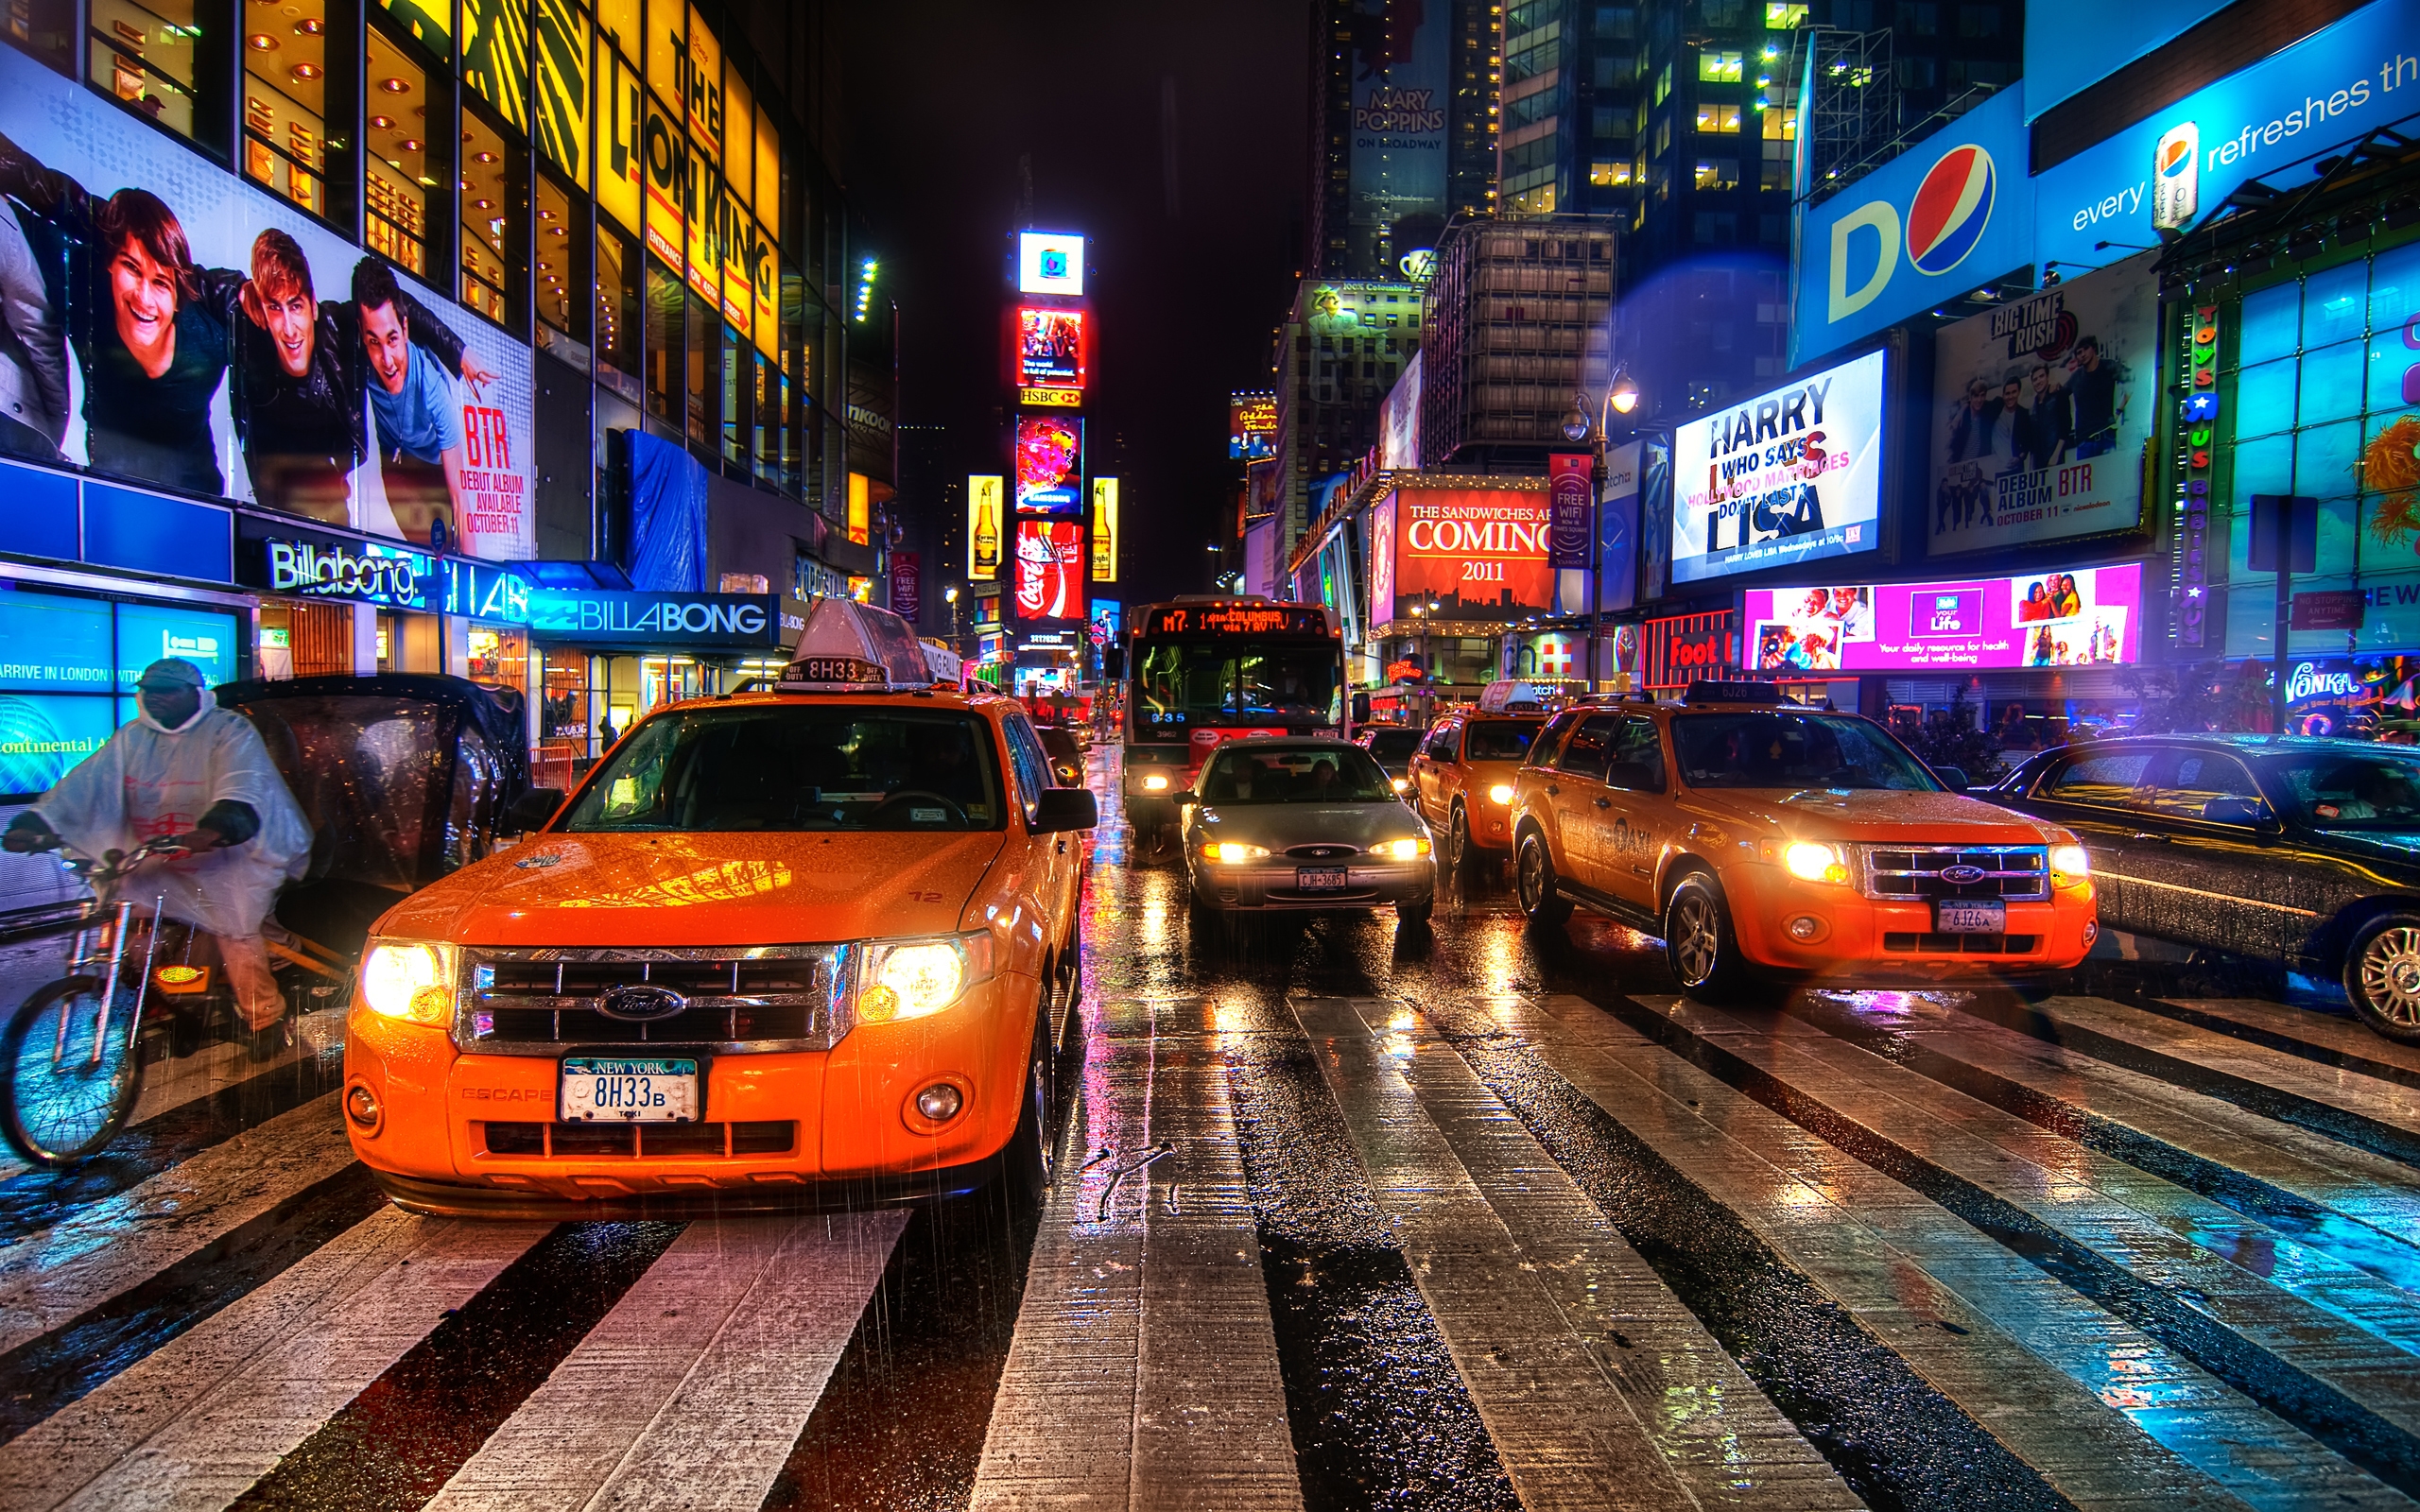 580908 new york, taxi, world, buildings, hd, 4k, 5k, road, city, cab,  photography - Rare Gallery HD Wallpapers